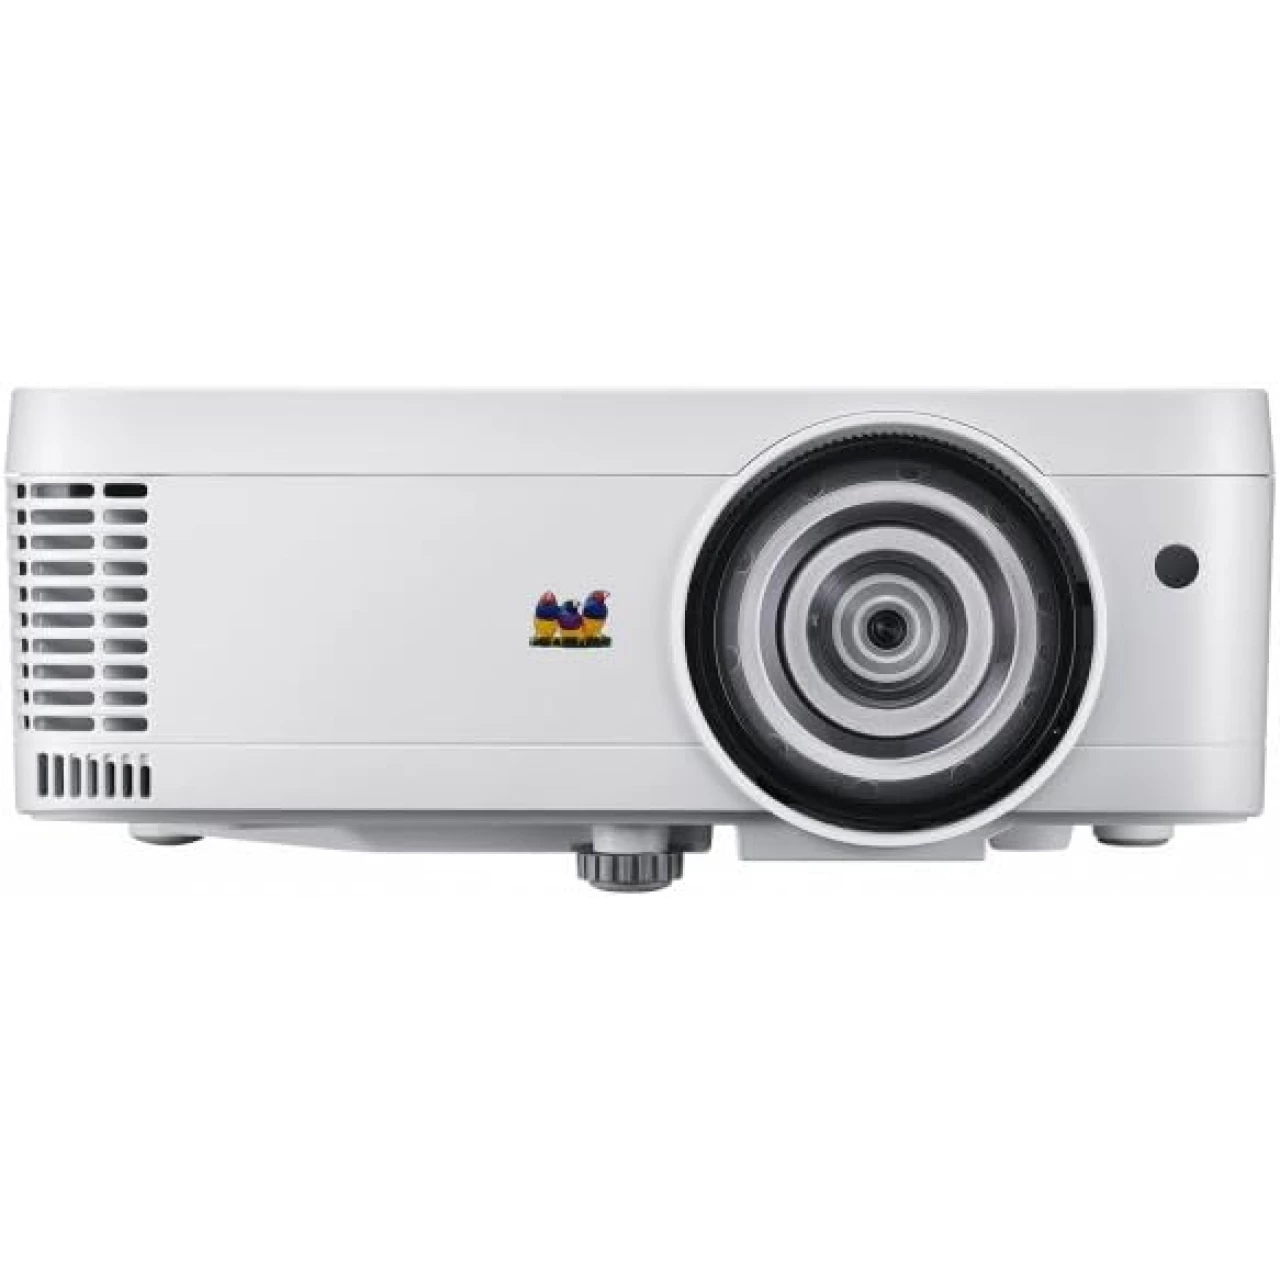 ViewSonic PS600X 3500 Lumens XGA HDMI Networkable Short Throw Projector for Home and Office